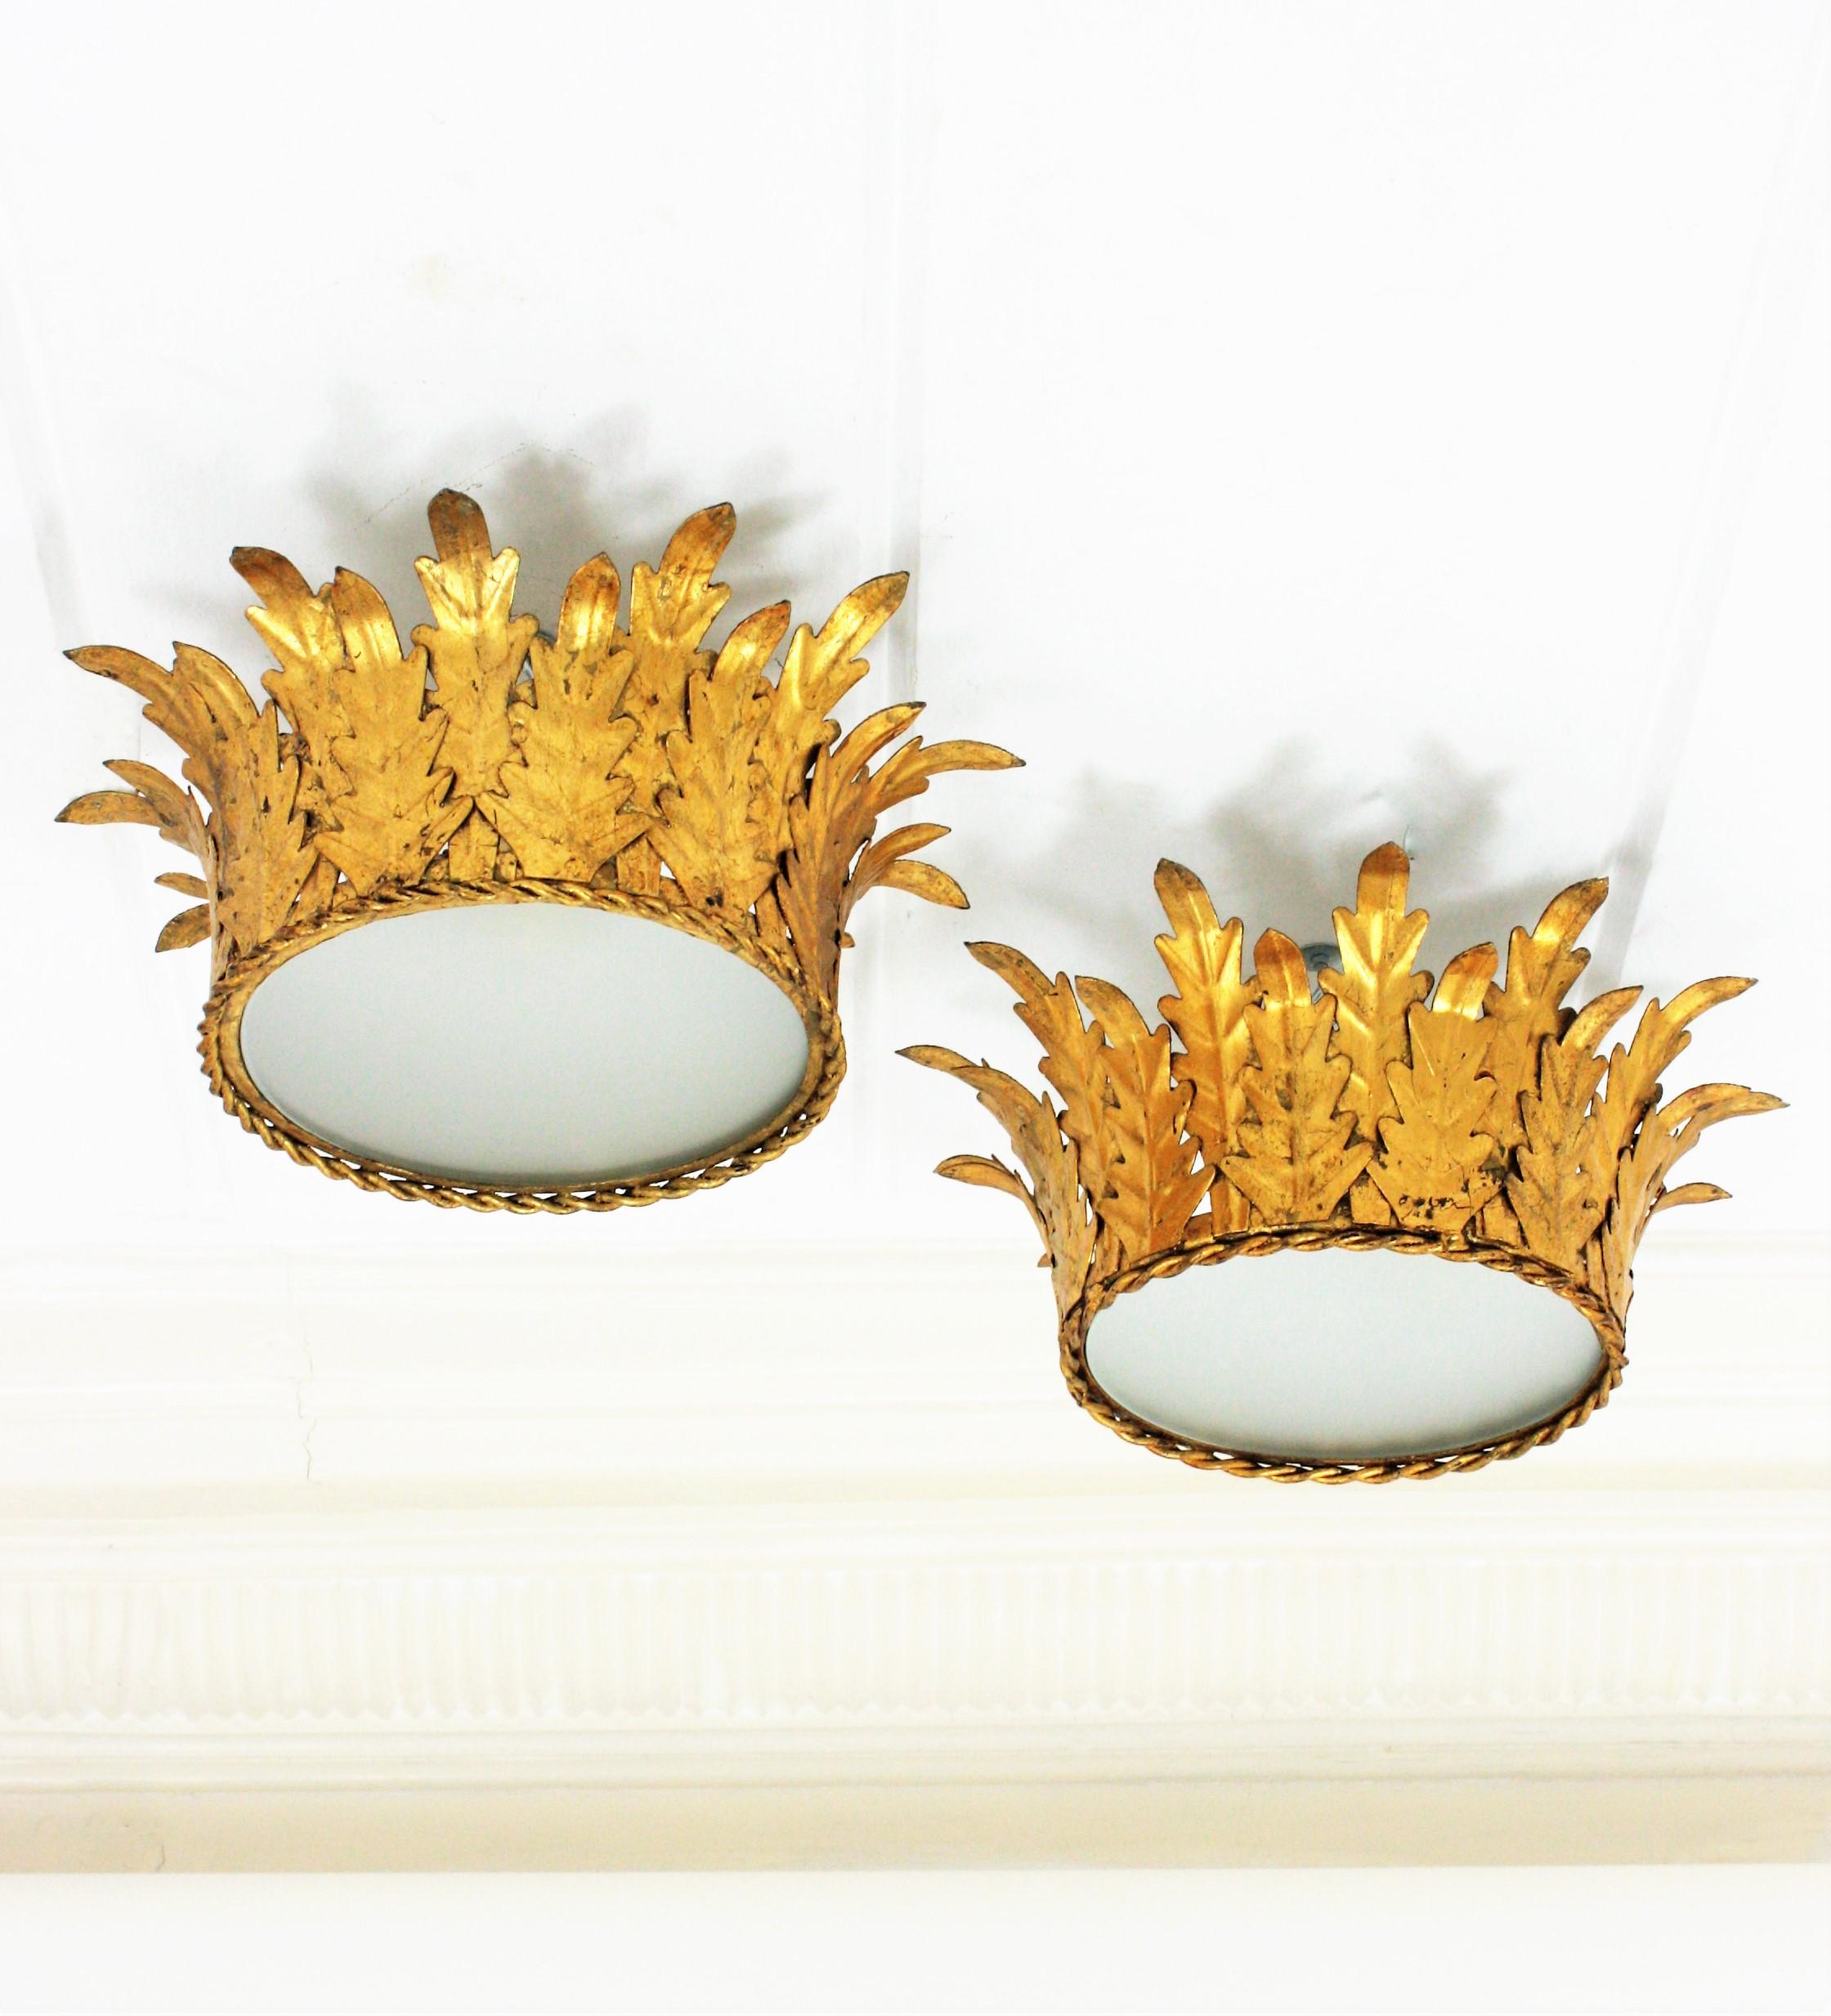 Two Neoclassical style hand-hammered gold leaf gilt iron crown shaped flush mounts or pendants, France, 1940s.
These flush mounts feature gilt iron structures adorned by foliage details. They have frosted glass diffusers that allow to disperse a